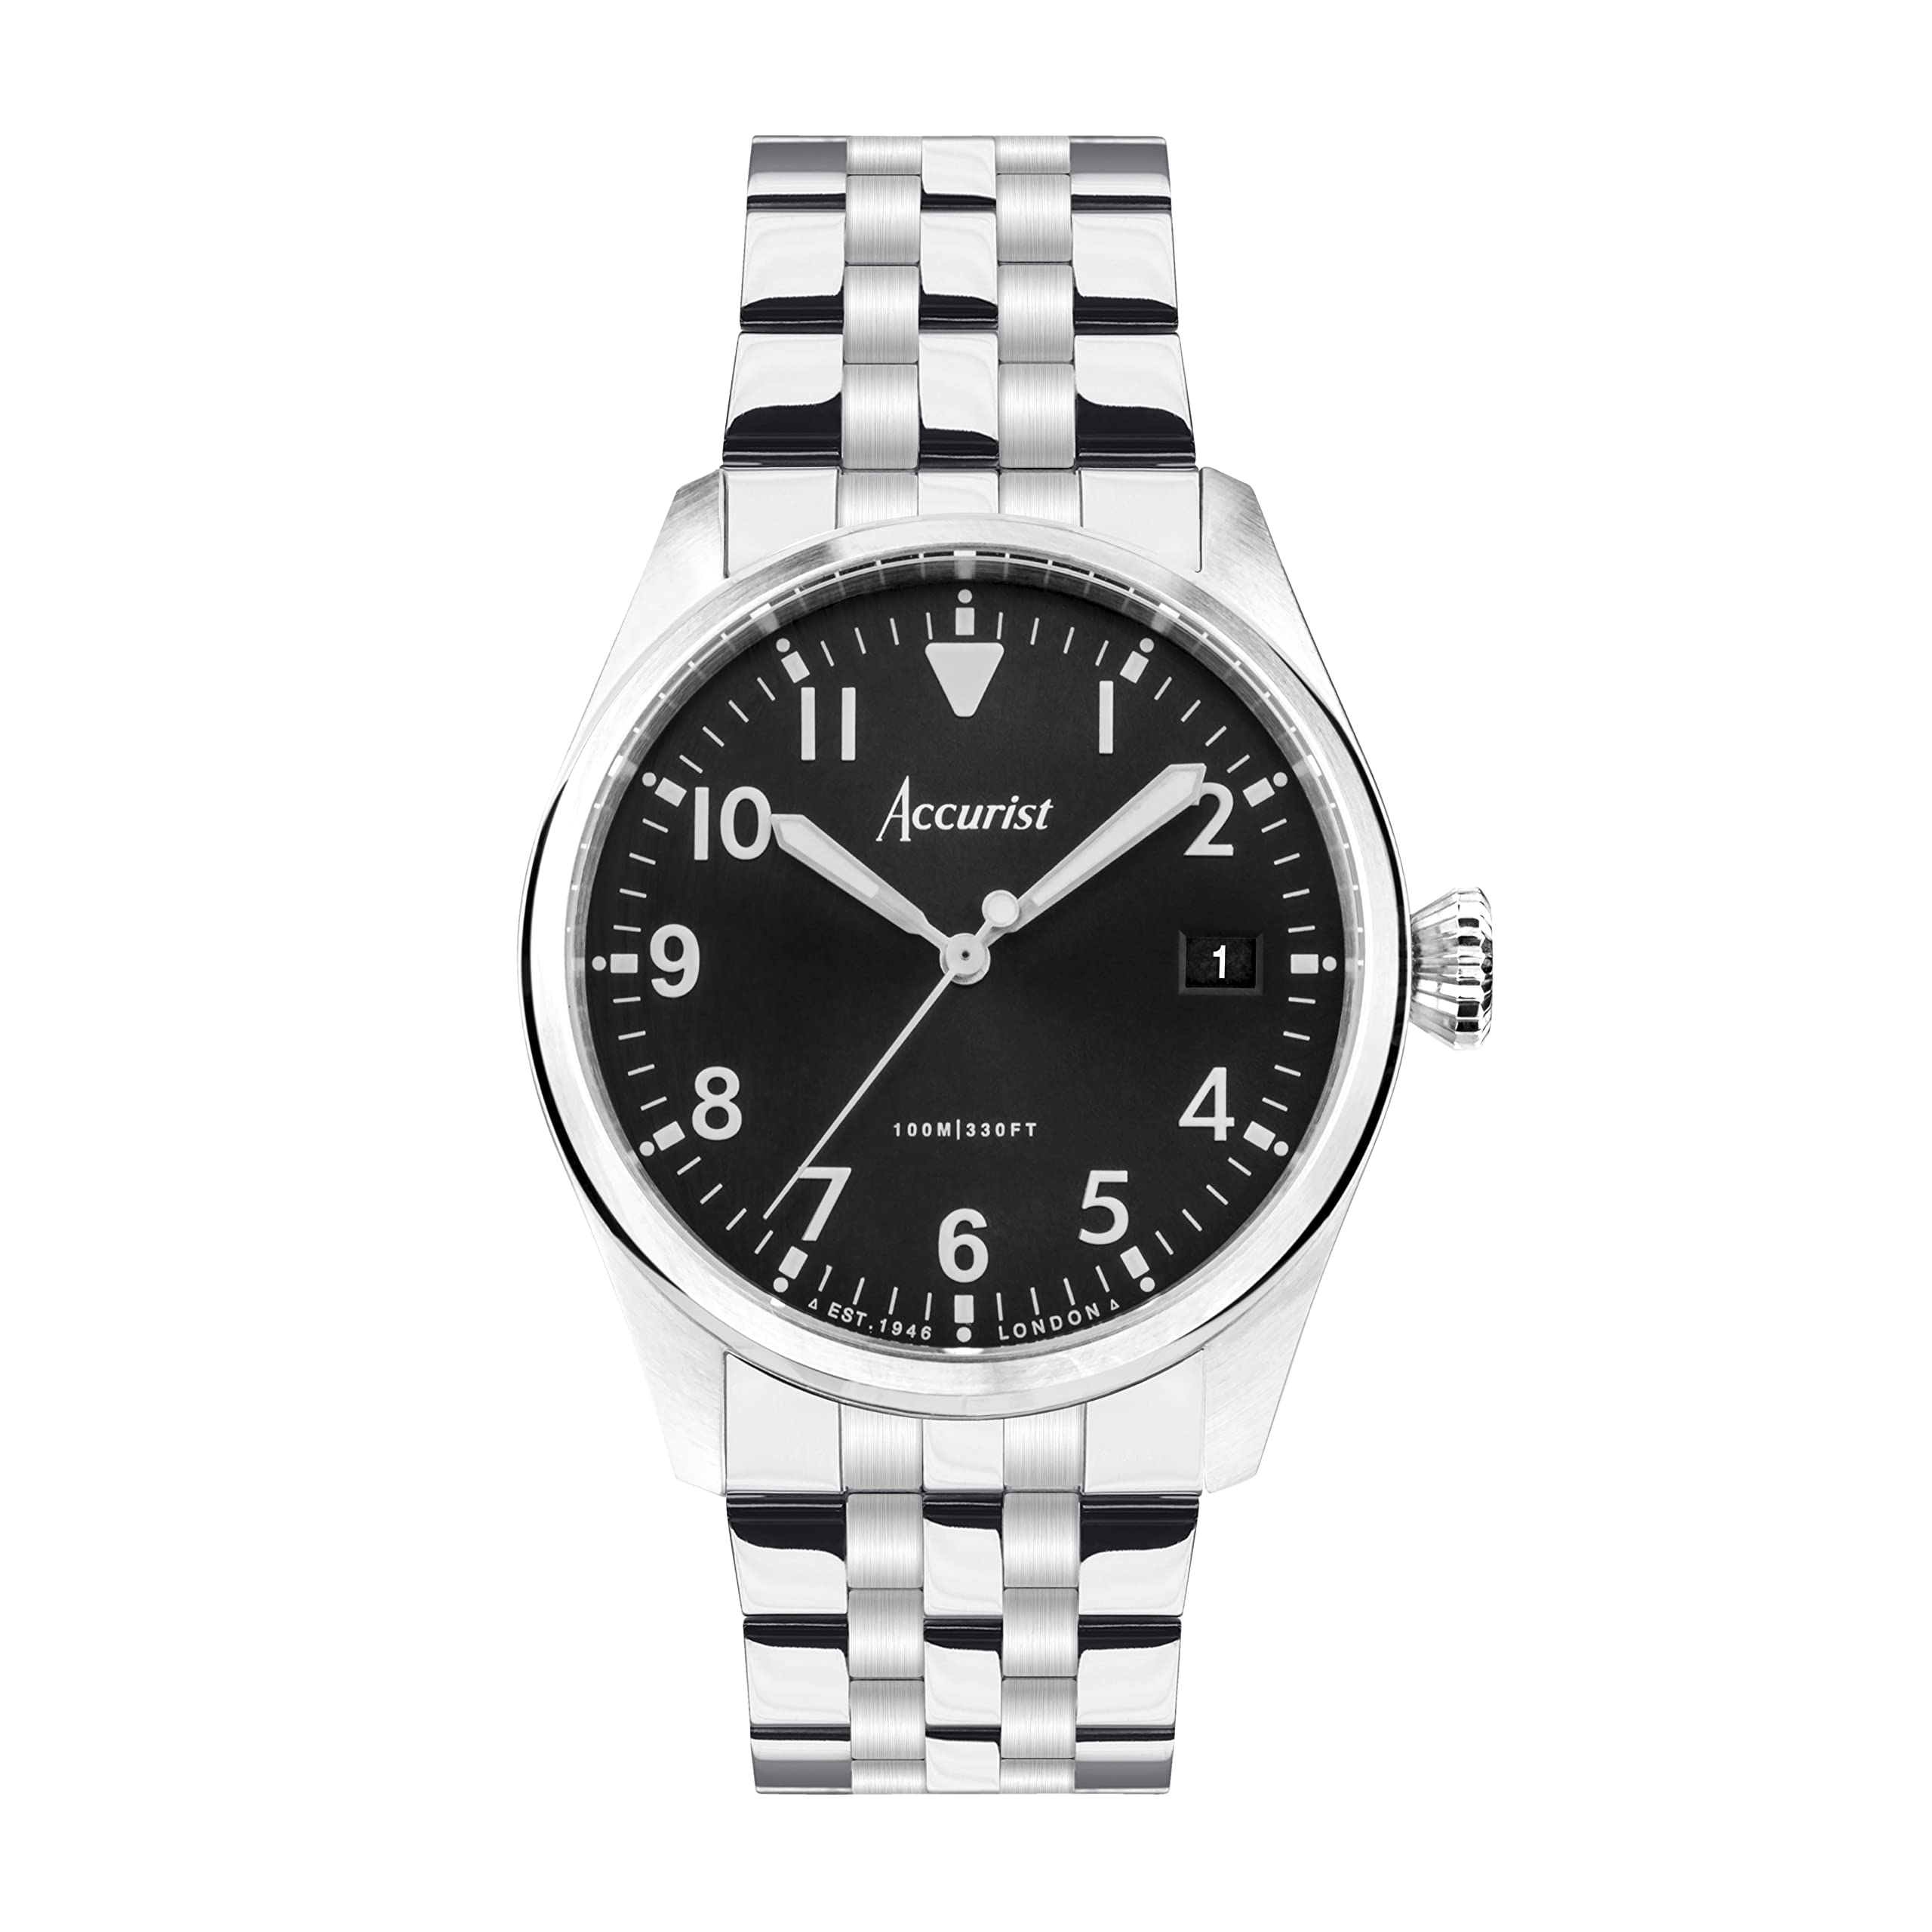 Accurist Aviation 41mm Quartz Watch in Black with Analogue Display and Stainless Steel Bracelet 76000並行輸入品